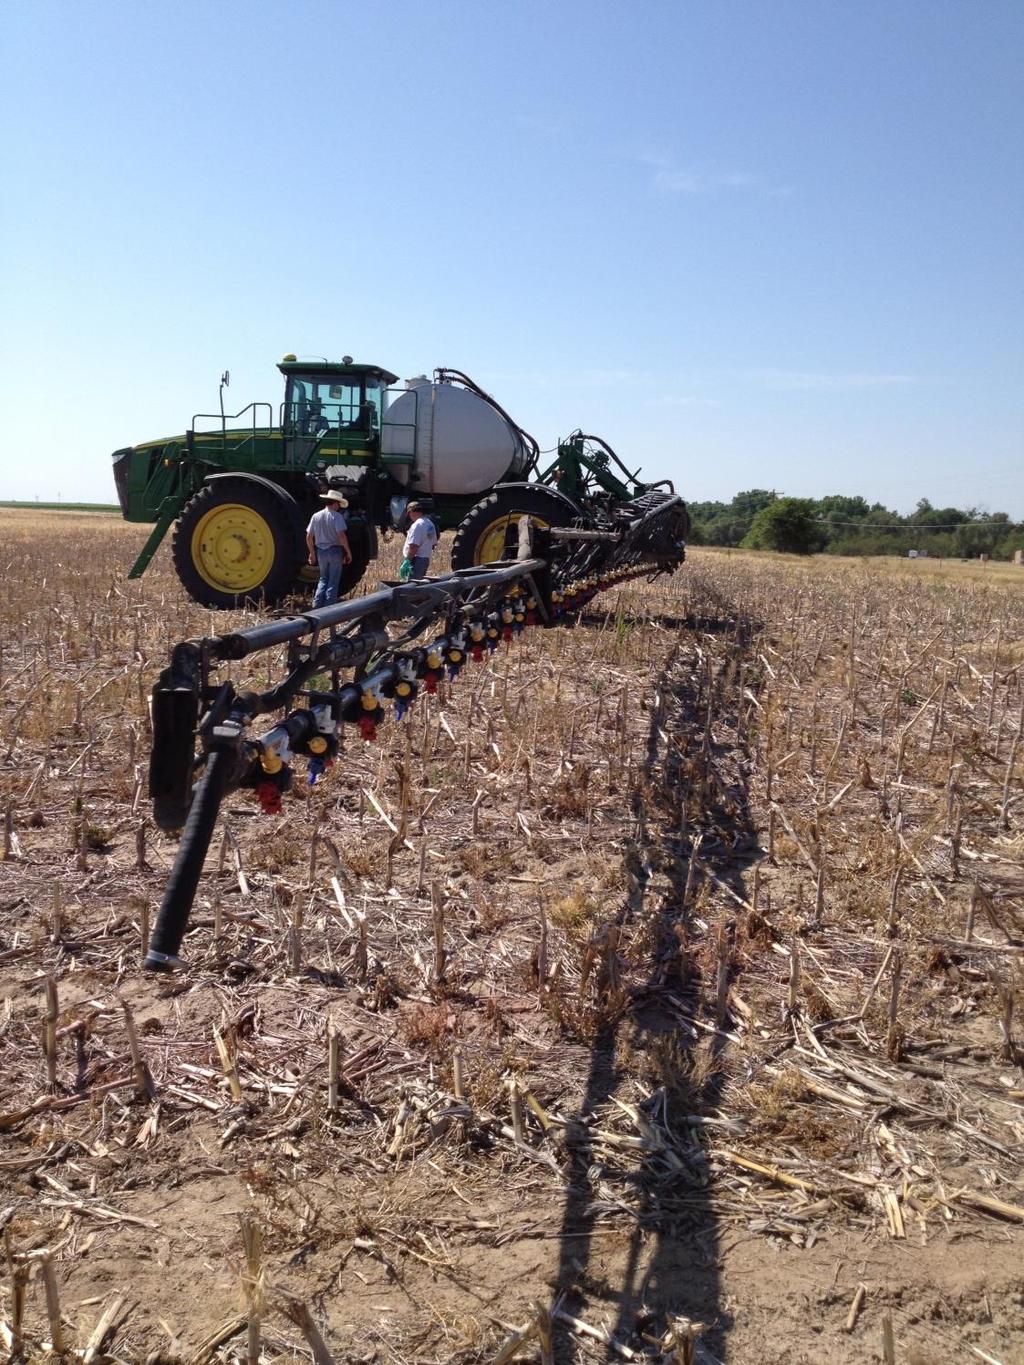 Application Equipment The application method is the most important aspect of these studies! 80-120 foot boom groundspray equipment is in common use by growers and professional applicators.